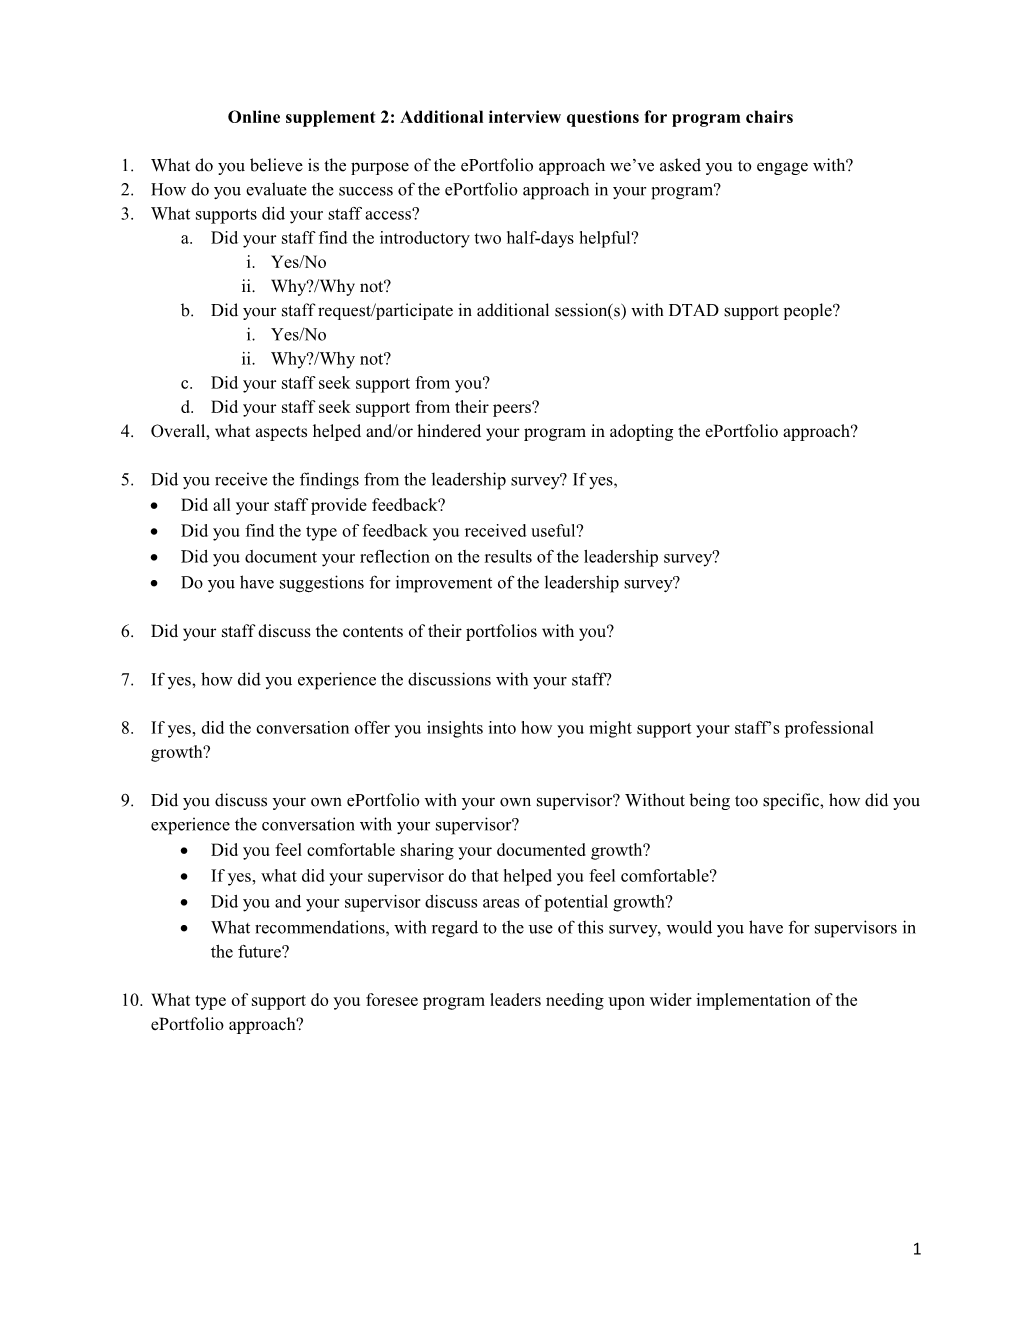 Online Supplement 2: Additional Interview Questions for Program Chairs